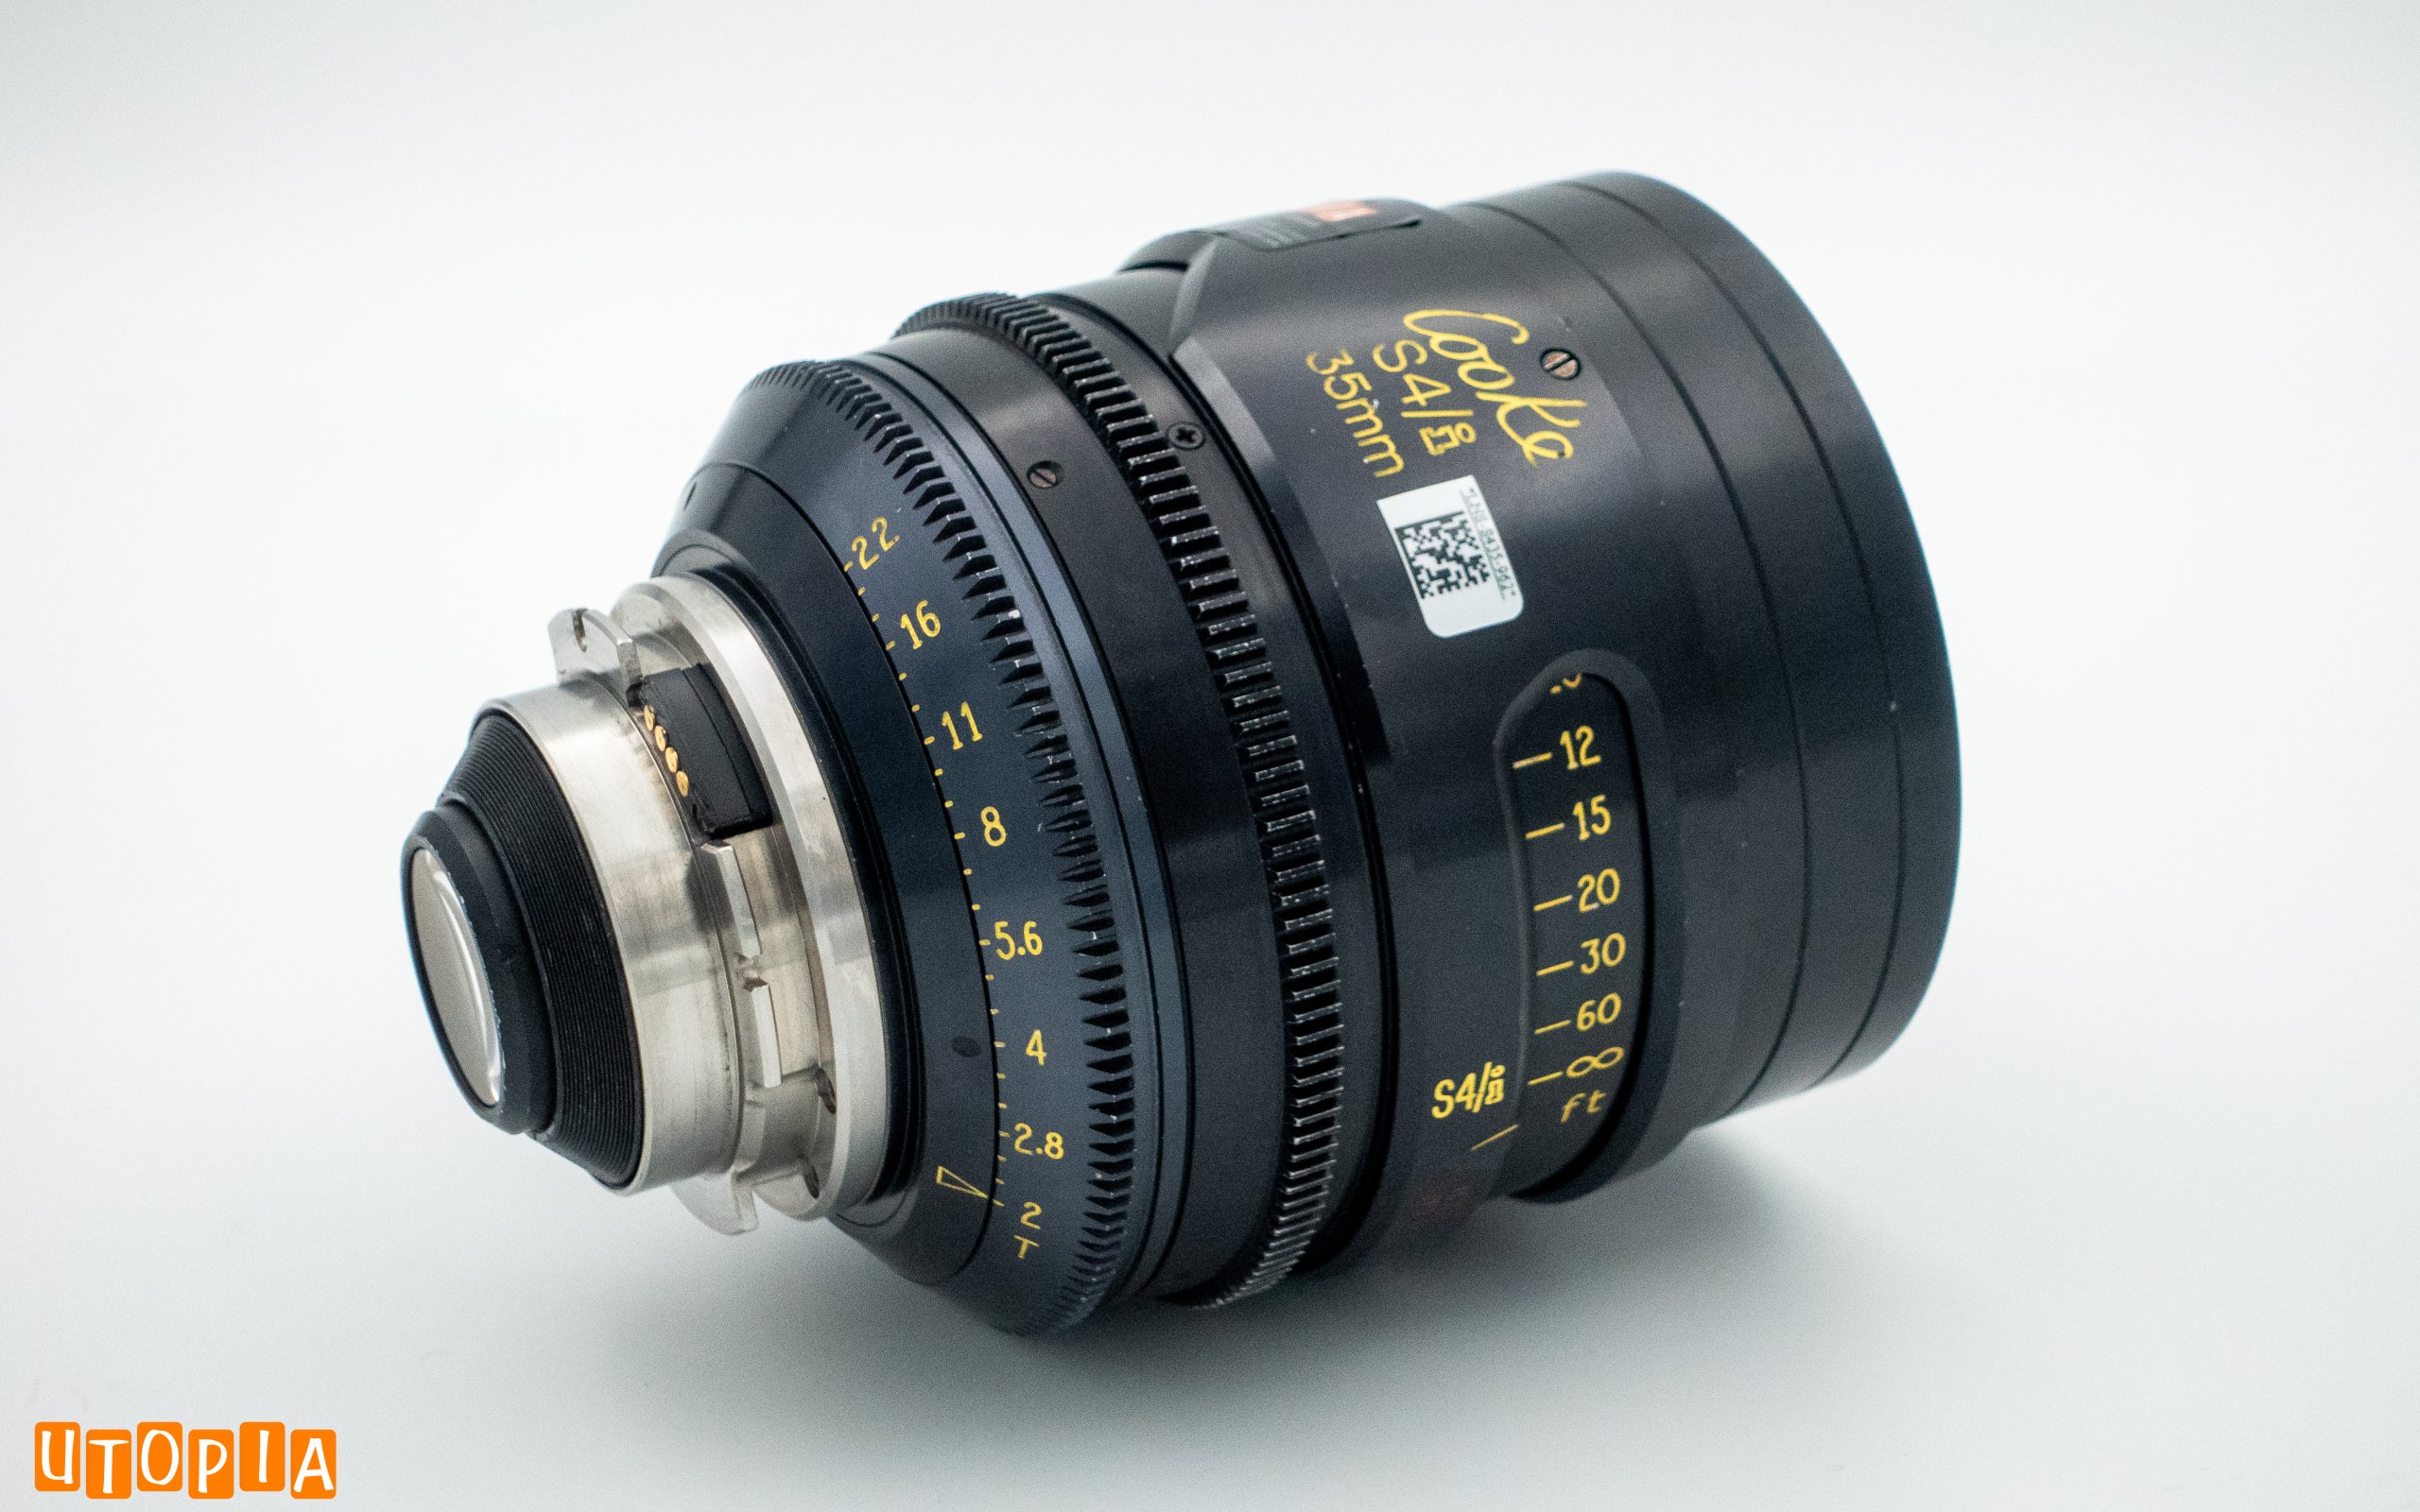 Cooke S4i (1 of 4)